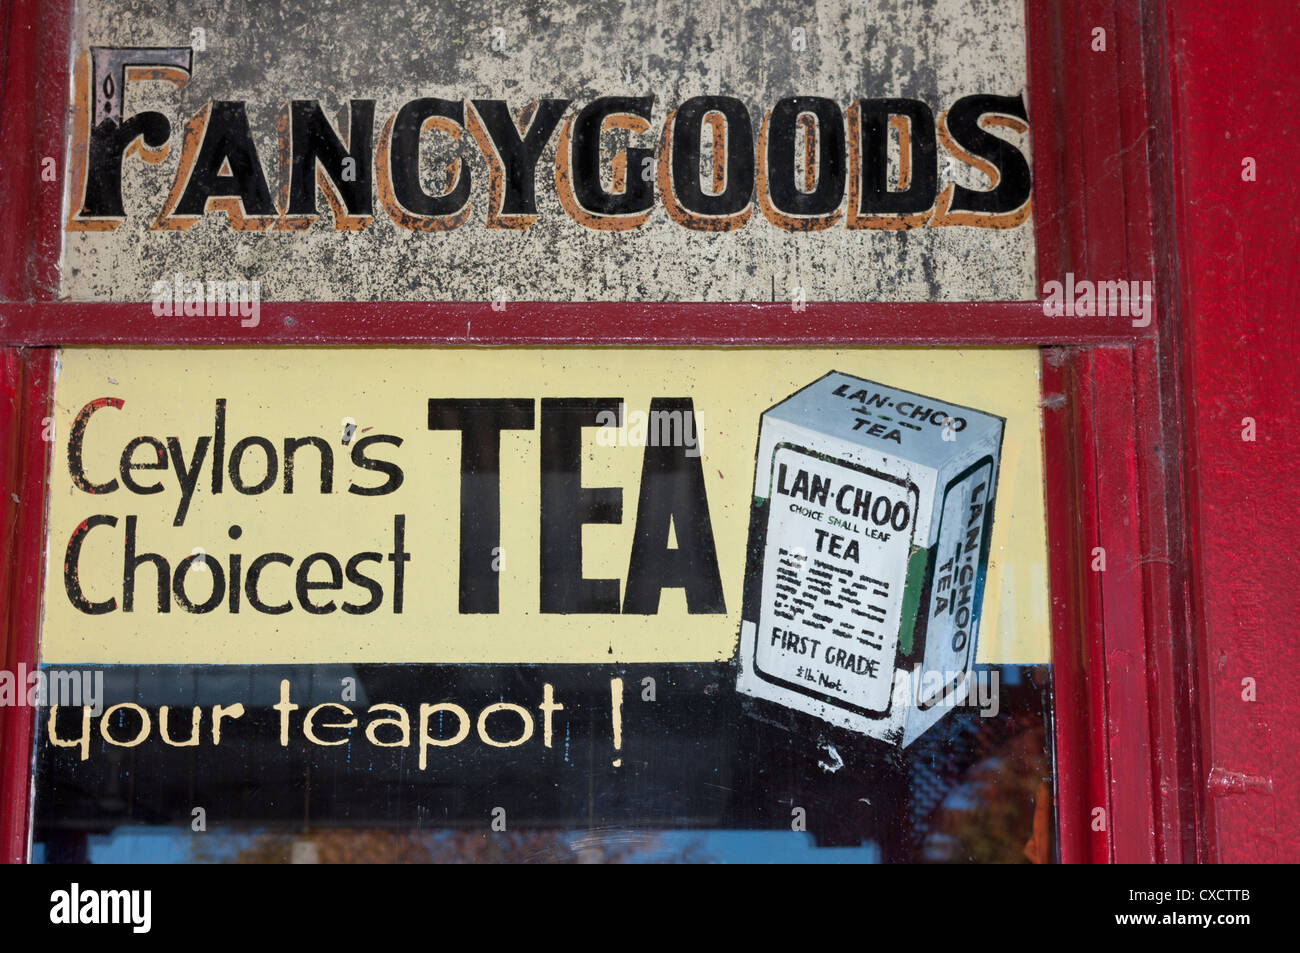 An old shop window advertisement for fancy goods and Ceylon tea. Stock Photo